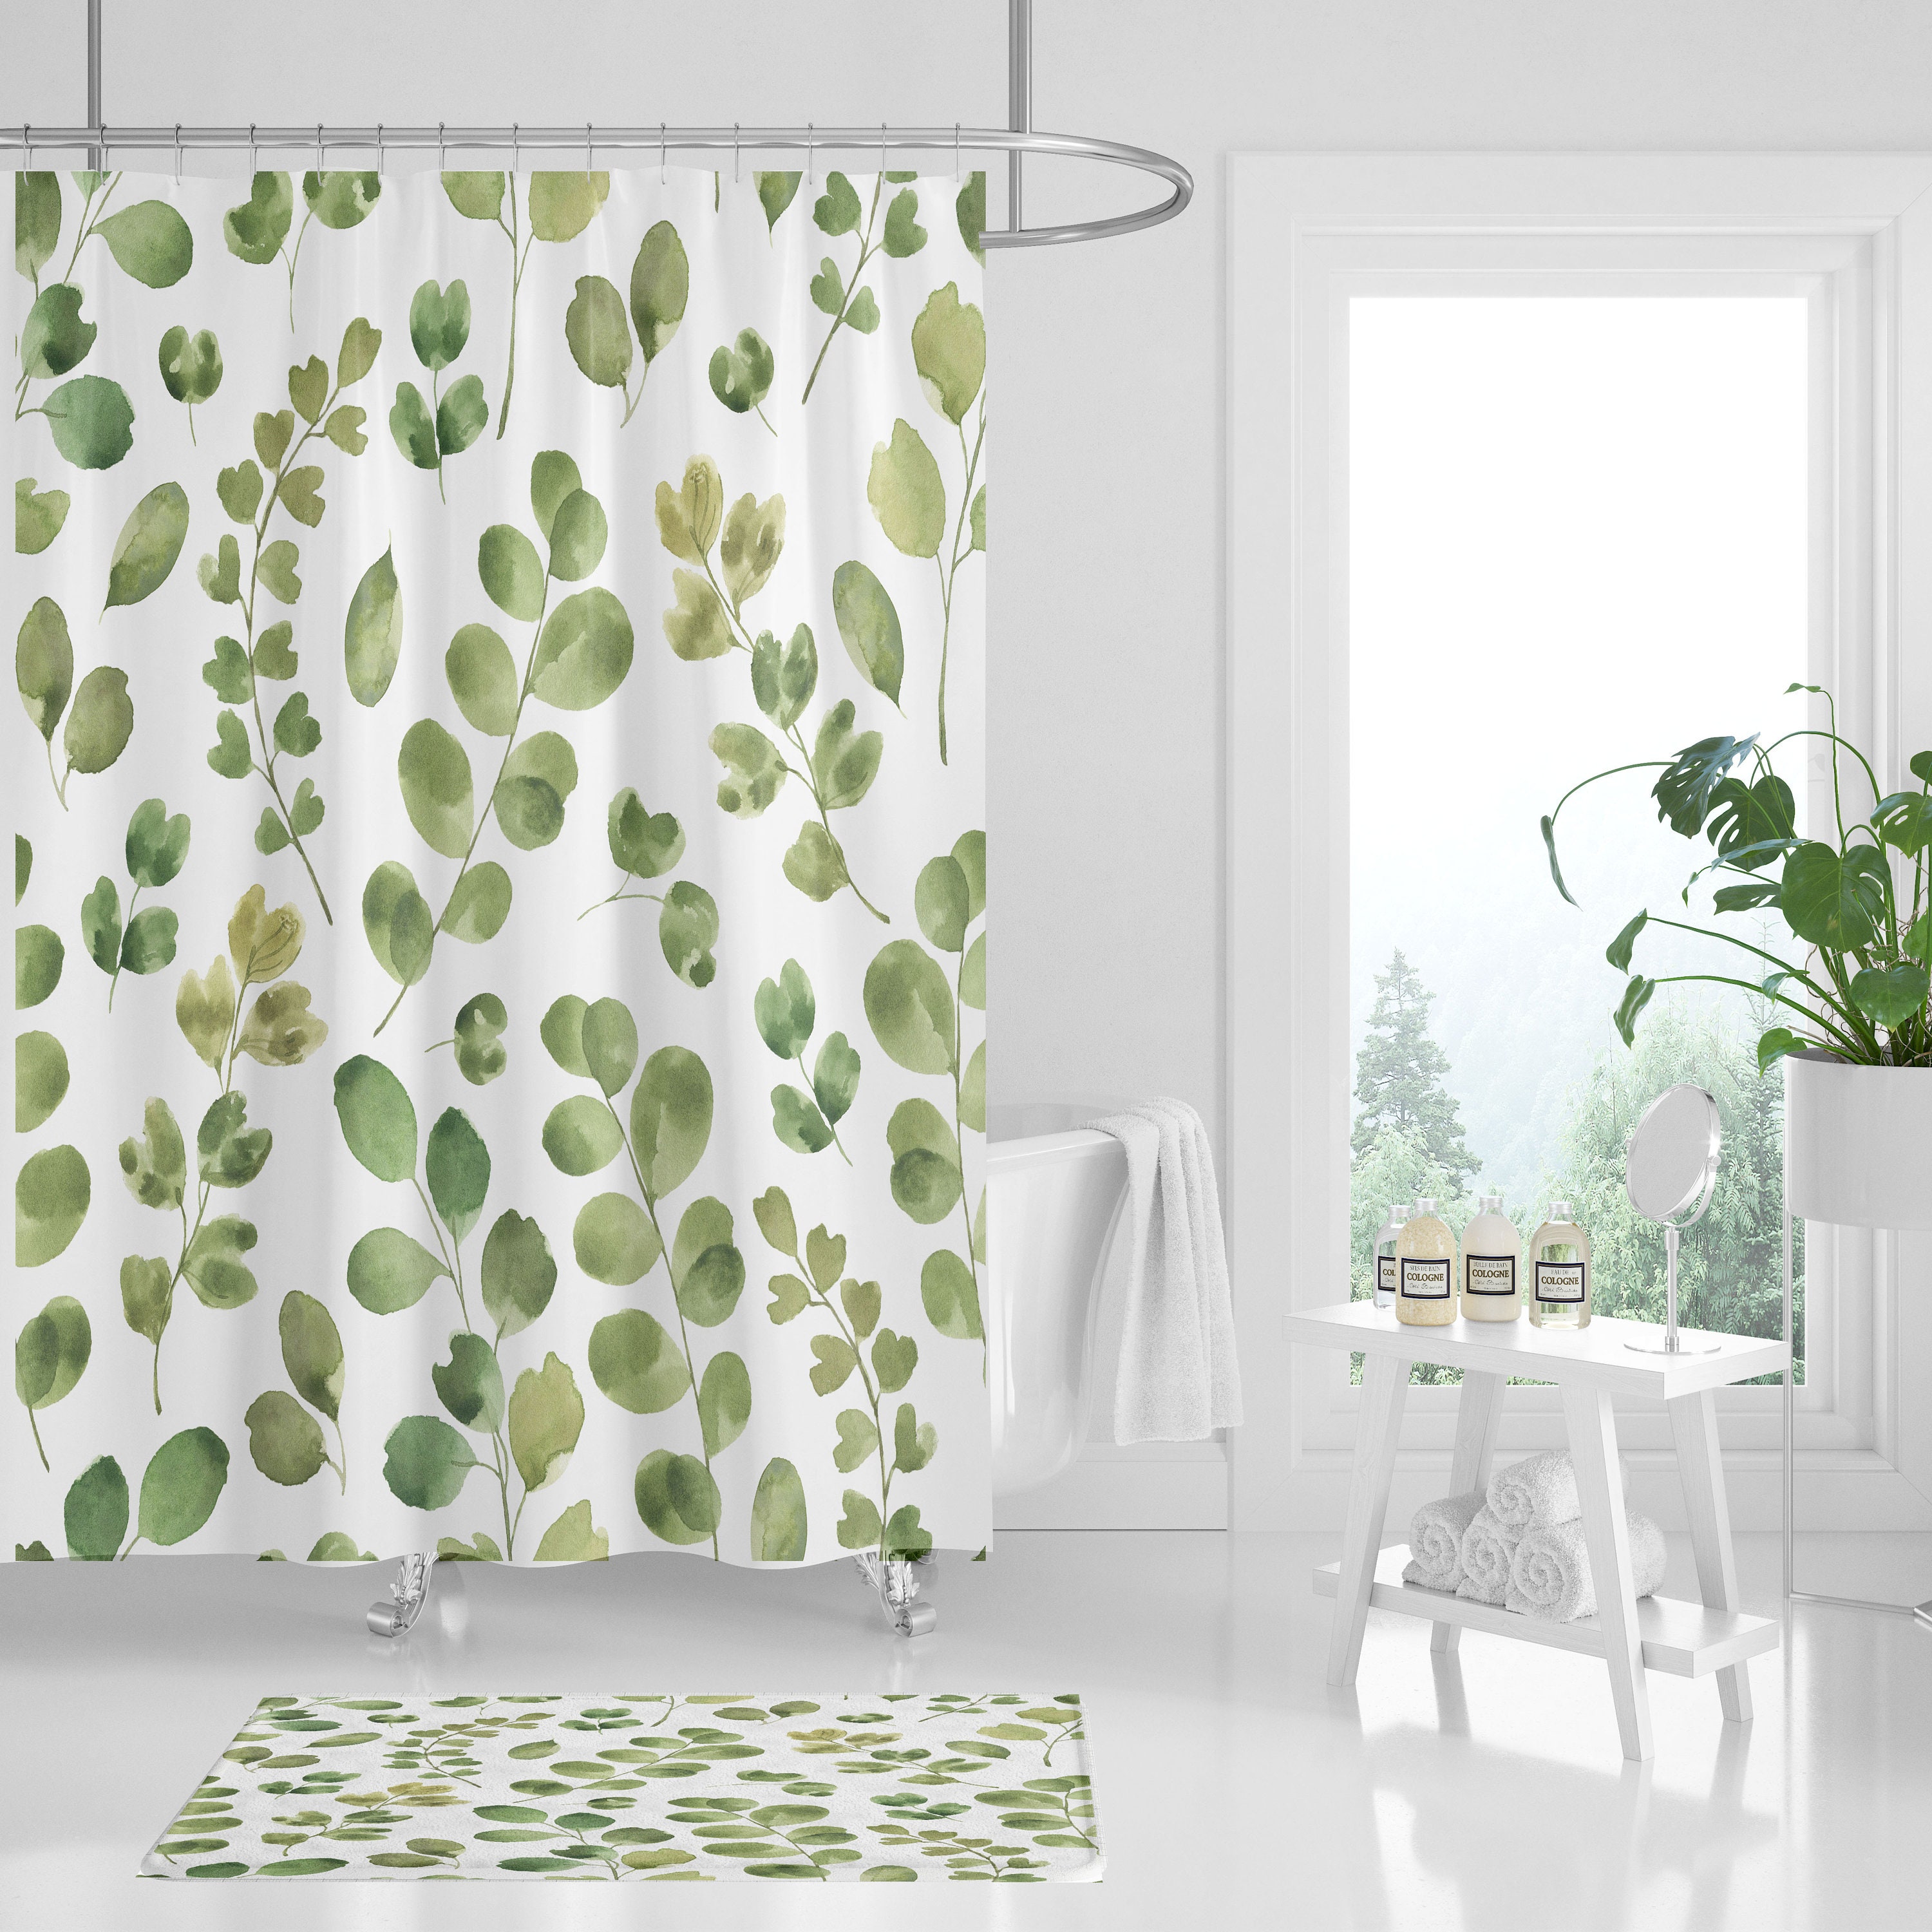 Details about   Watercolor Spring Flowers and Rustic Wood Wall Shower Curtain Set Bathroom Decor 